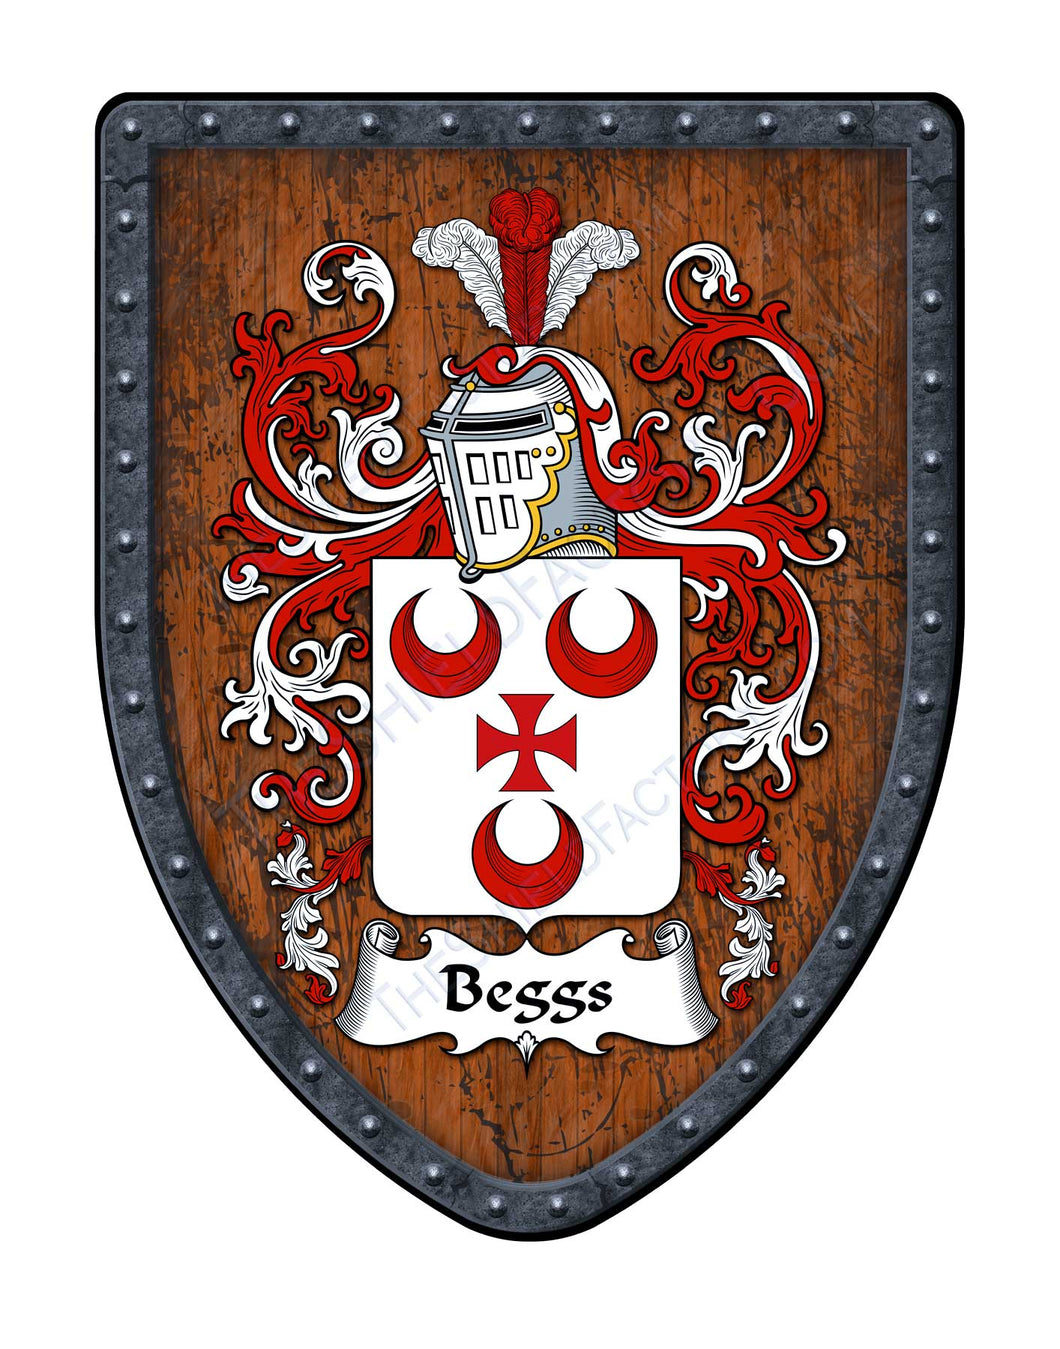 Beggs Family Crest Coat of Arms